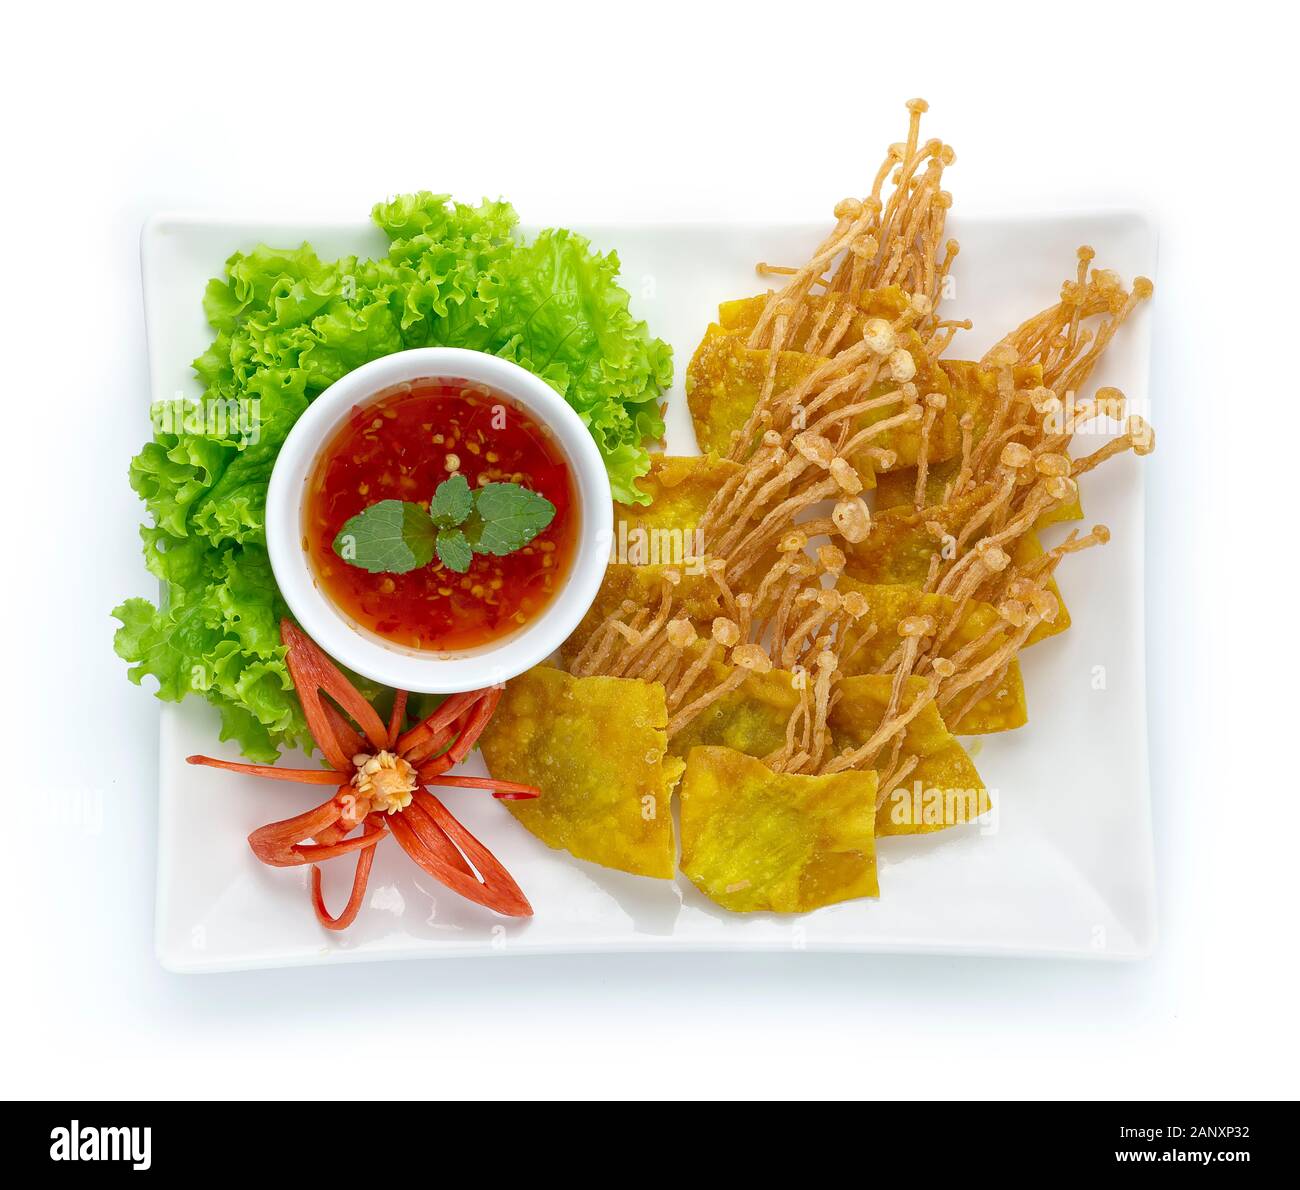 Crispy Wonton Wrapped with Golden Needles Mushrooms Served Sweet Chili Sauce Thai Food Asian Appetizer dish decorate with carved chili vegetables top Stock Photo